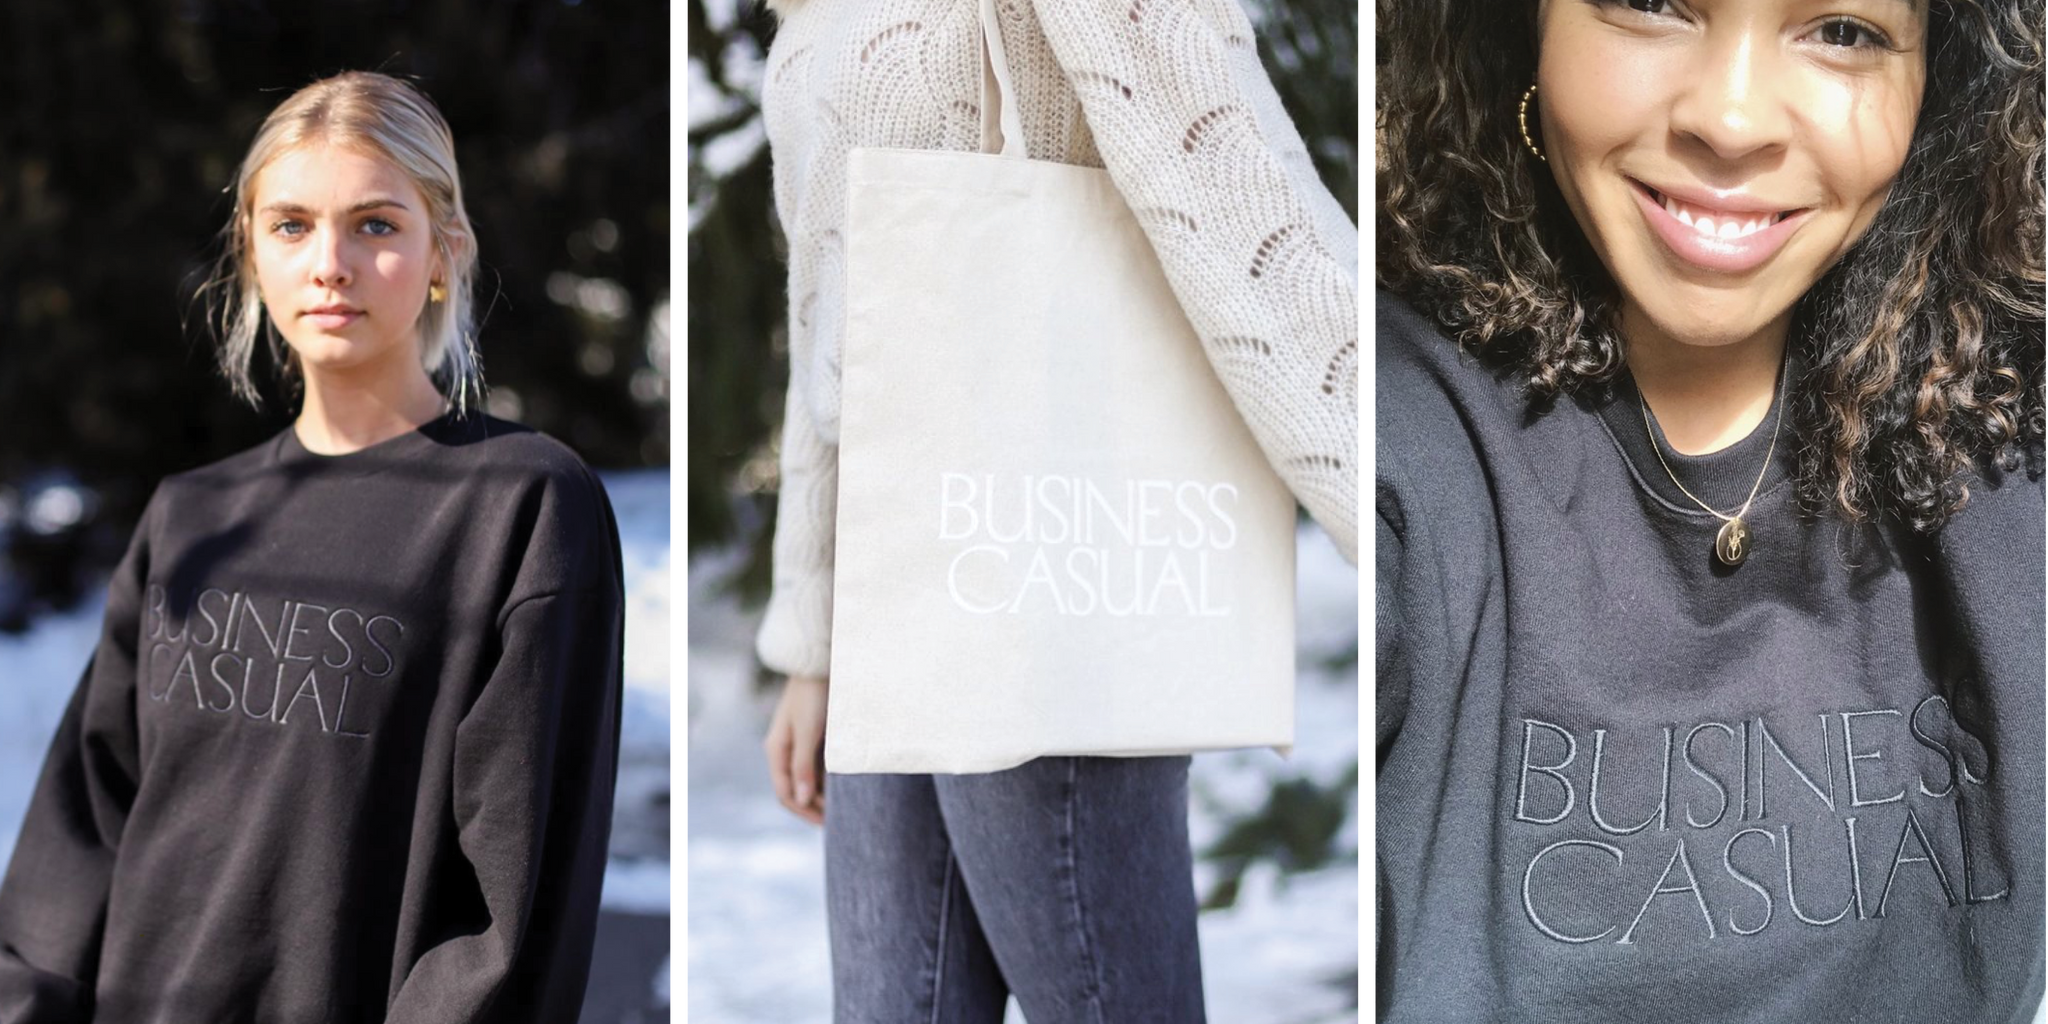 Business Casual Sweater & Tote Golden Rule